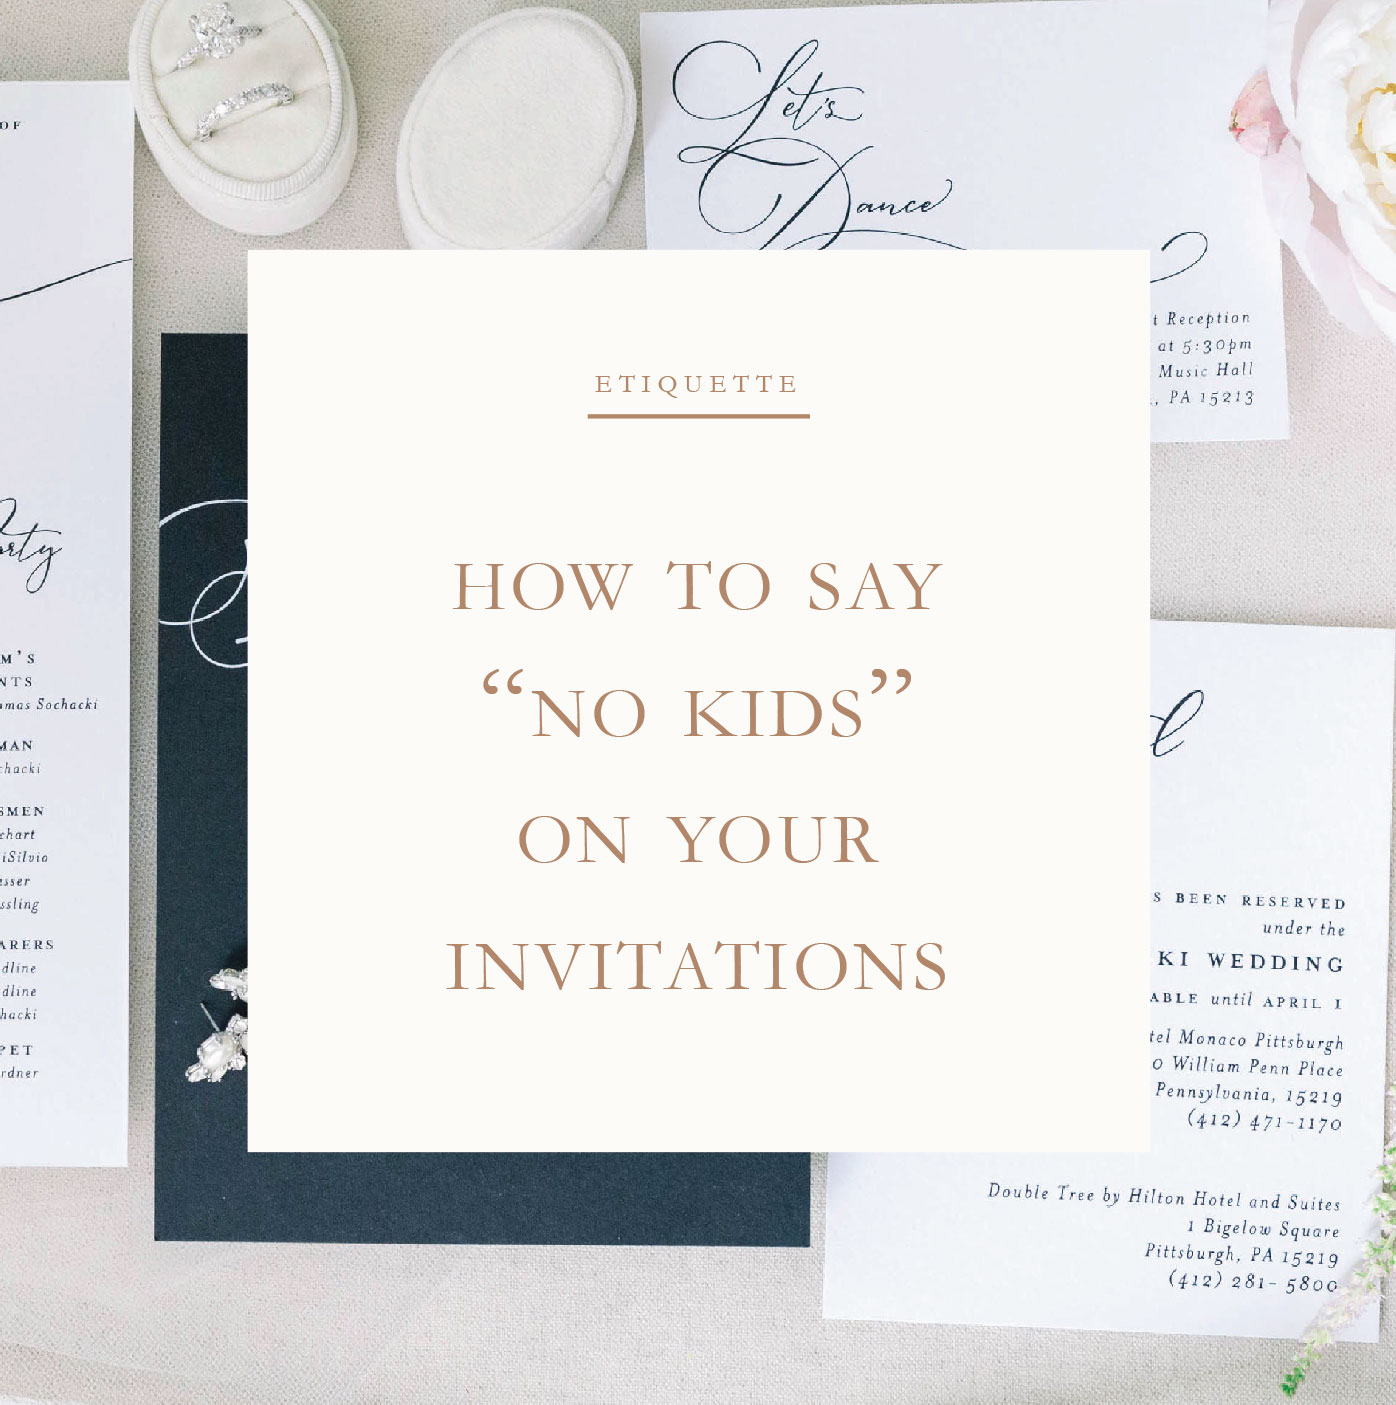 how to say "no kids" on your wedding invitations